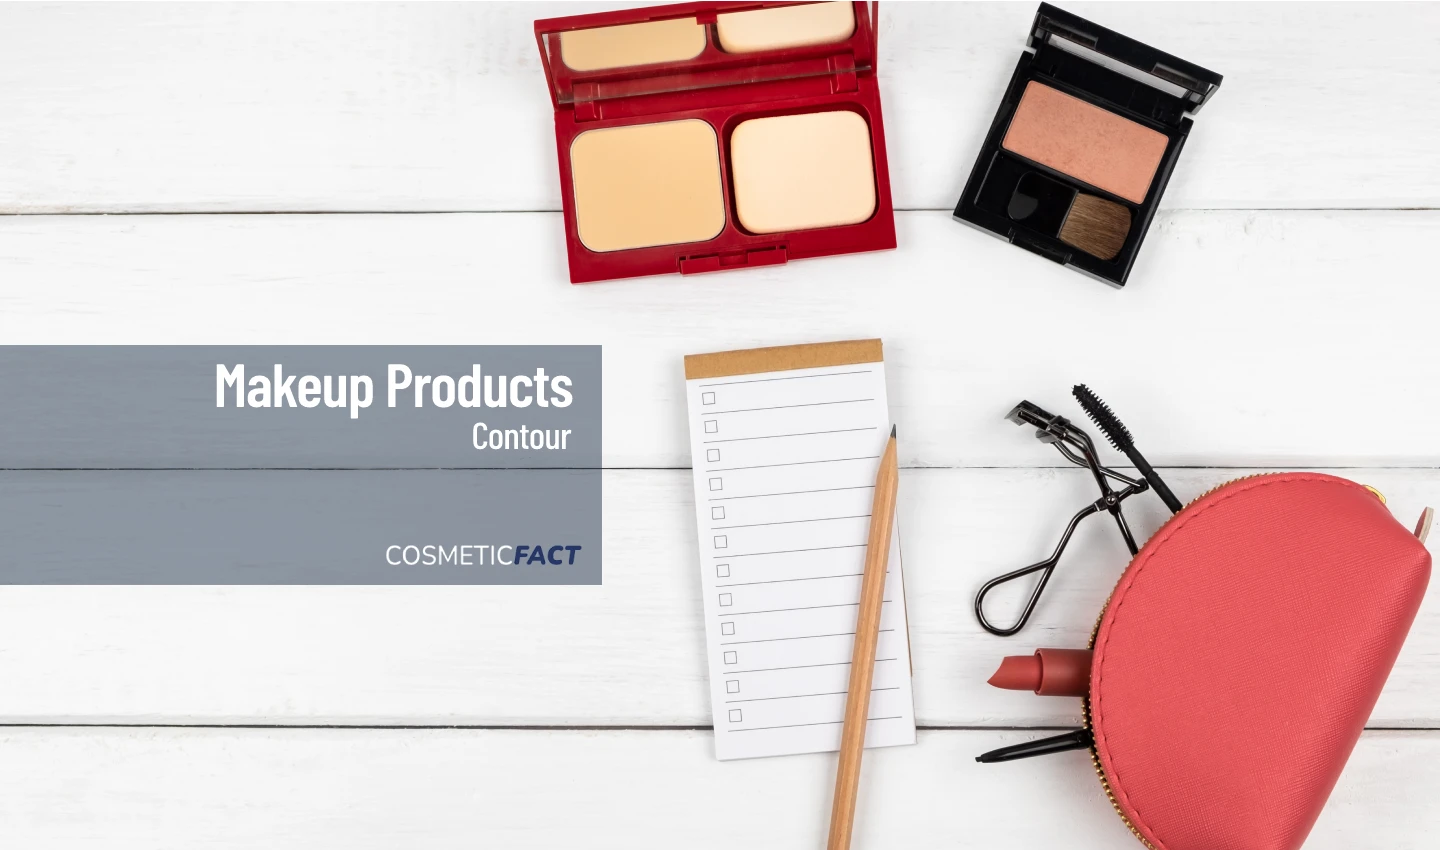 Checklist of affordable contouring products with a makeup bag, eyelash curler, lipstick, and contour set on a white background